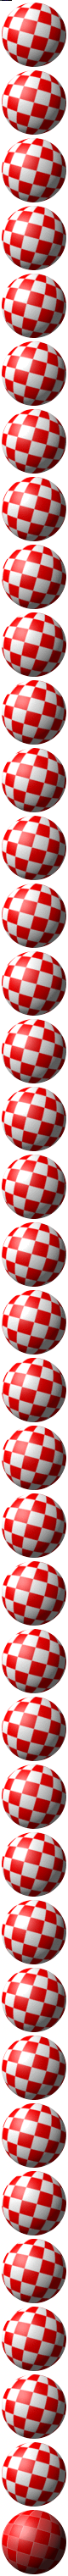 Ball Rotate.png